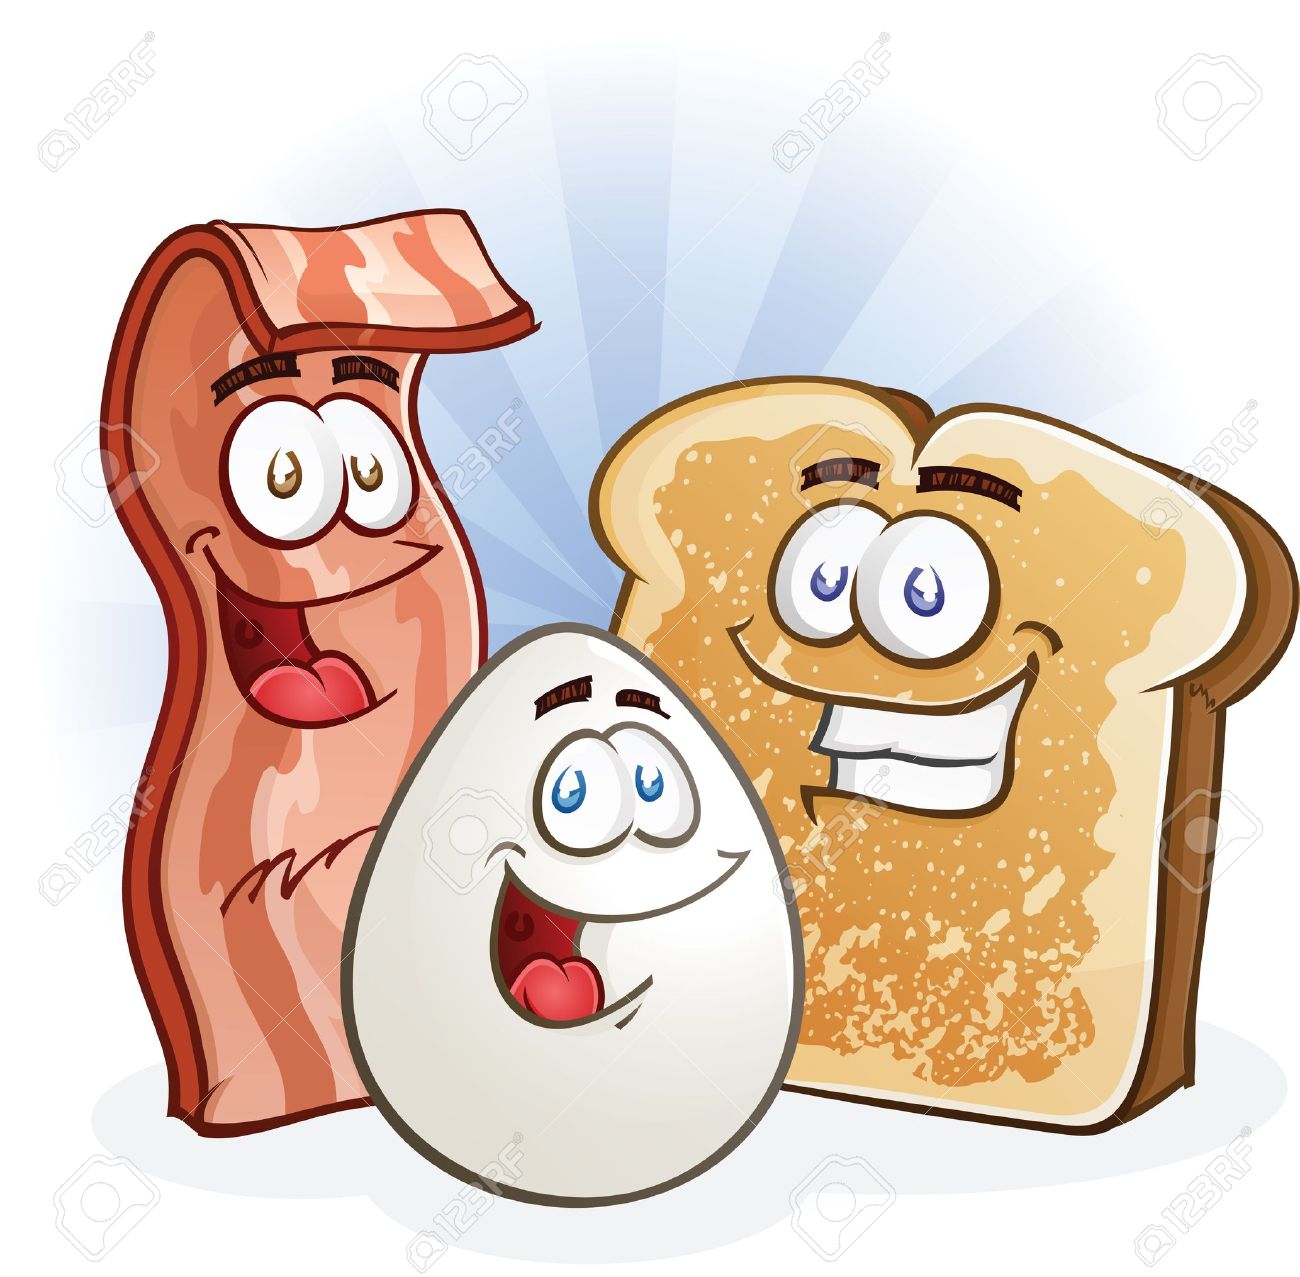 Apartments in Uptown Houston, Galleria Area A cartoon of bacon and egg next to a slice of bread, featuring apartments in the Galleria Area or Uptown Houston.